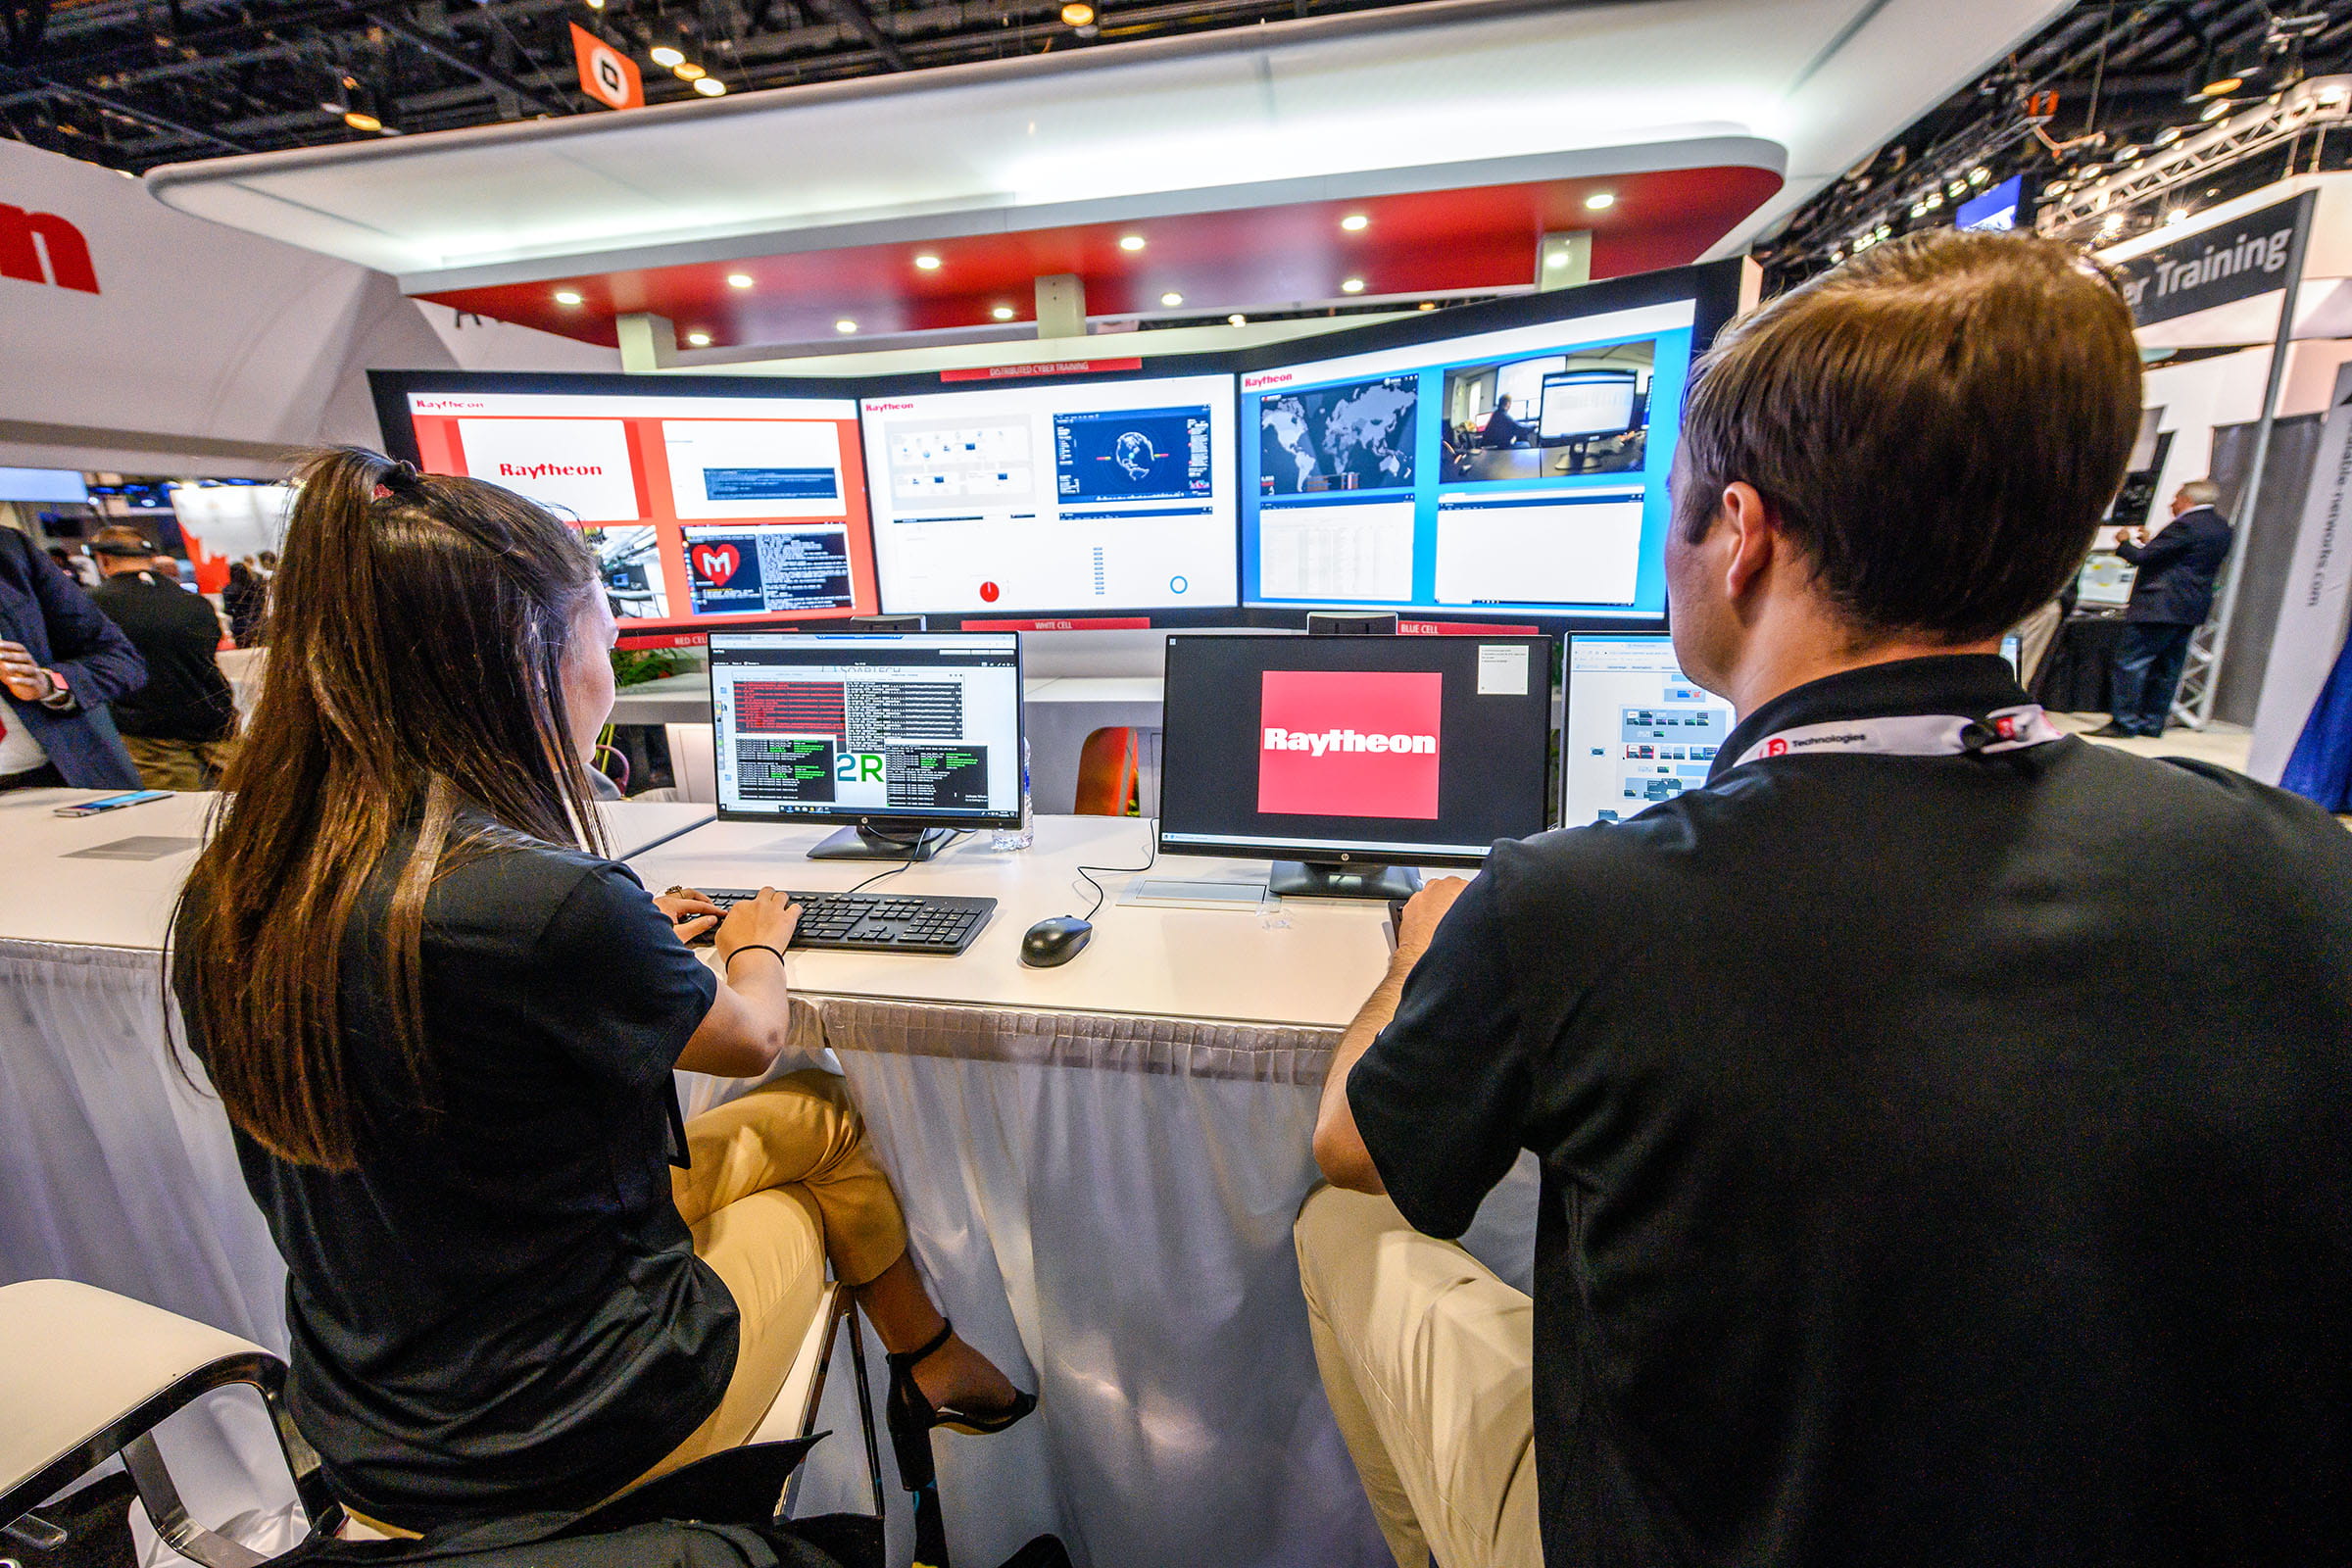 Pictured are two Raytheon Technologies employees presenting a demo of the company’s cyber training capabilities at an industry event.